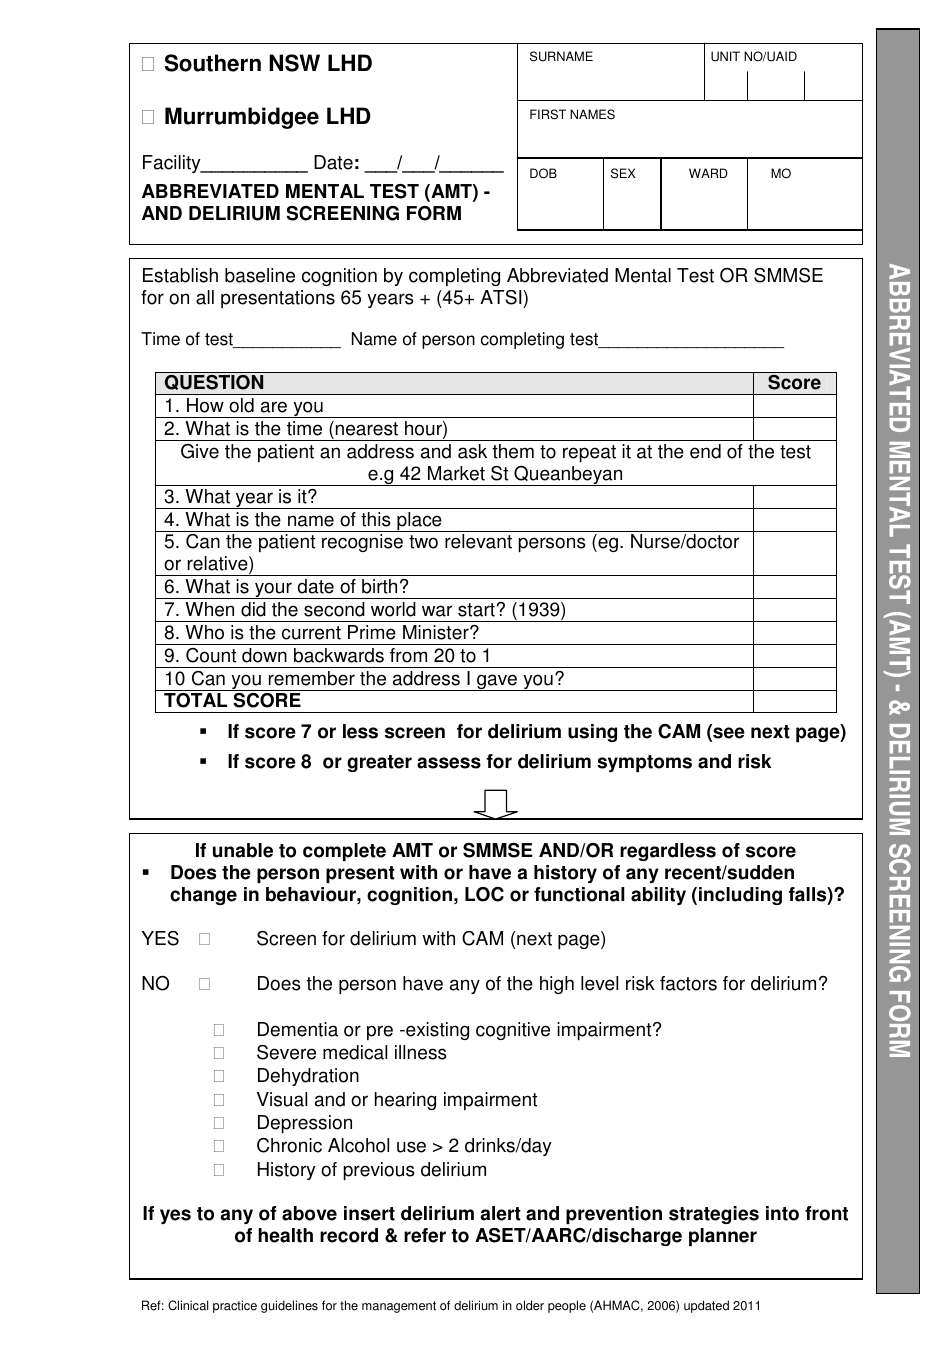 Abbreviated Mental Test (Amt) and Delirium Screening Form - Southern Nsw Lhd, Page 1